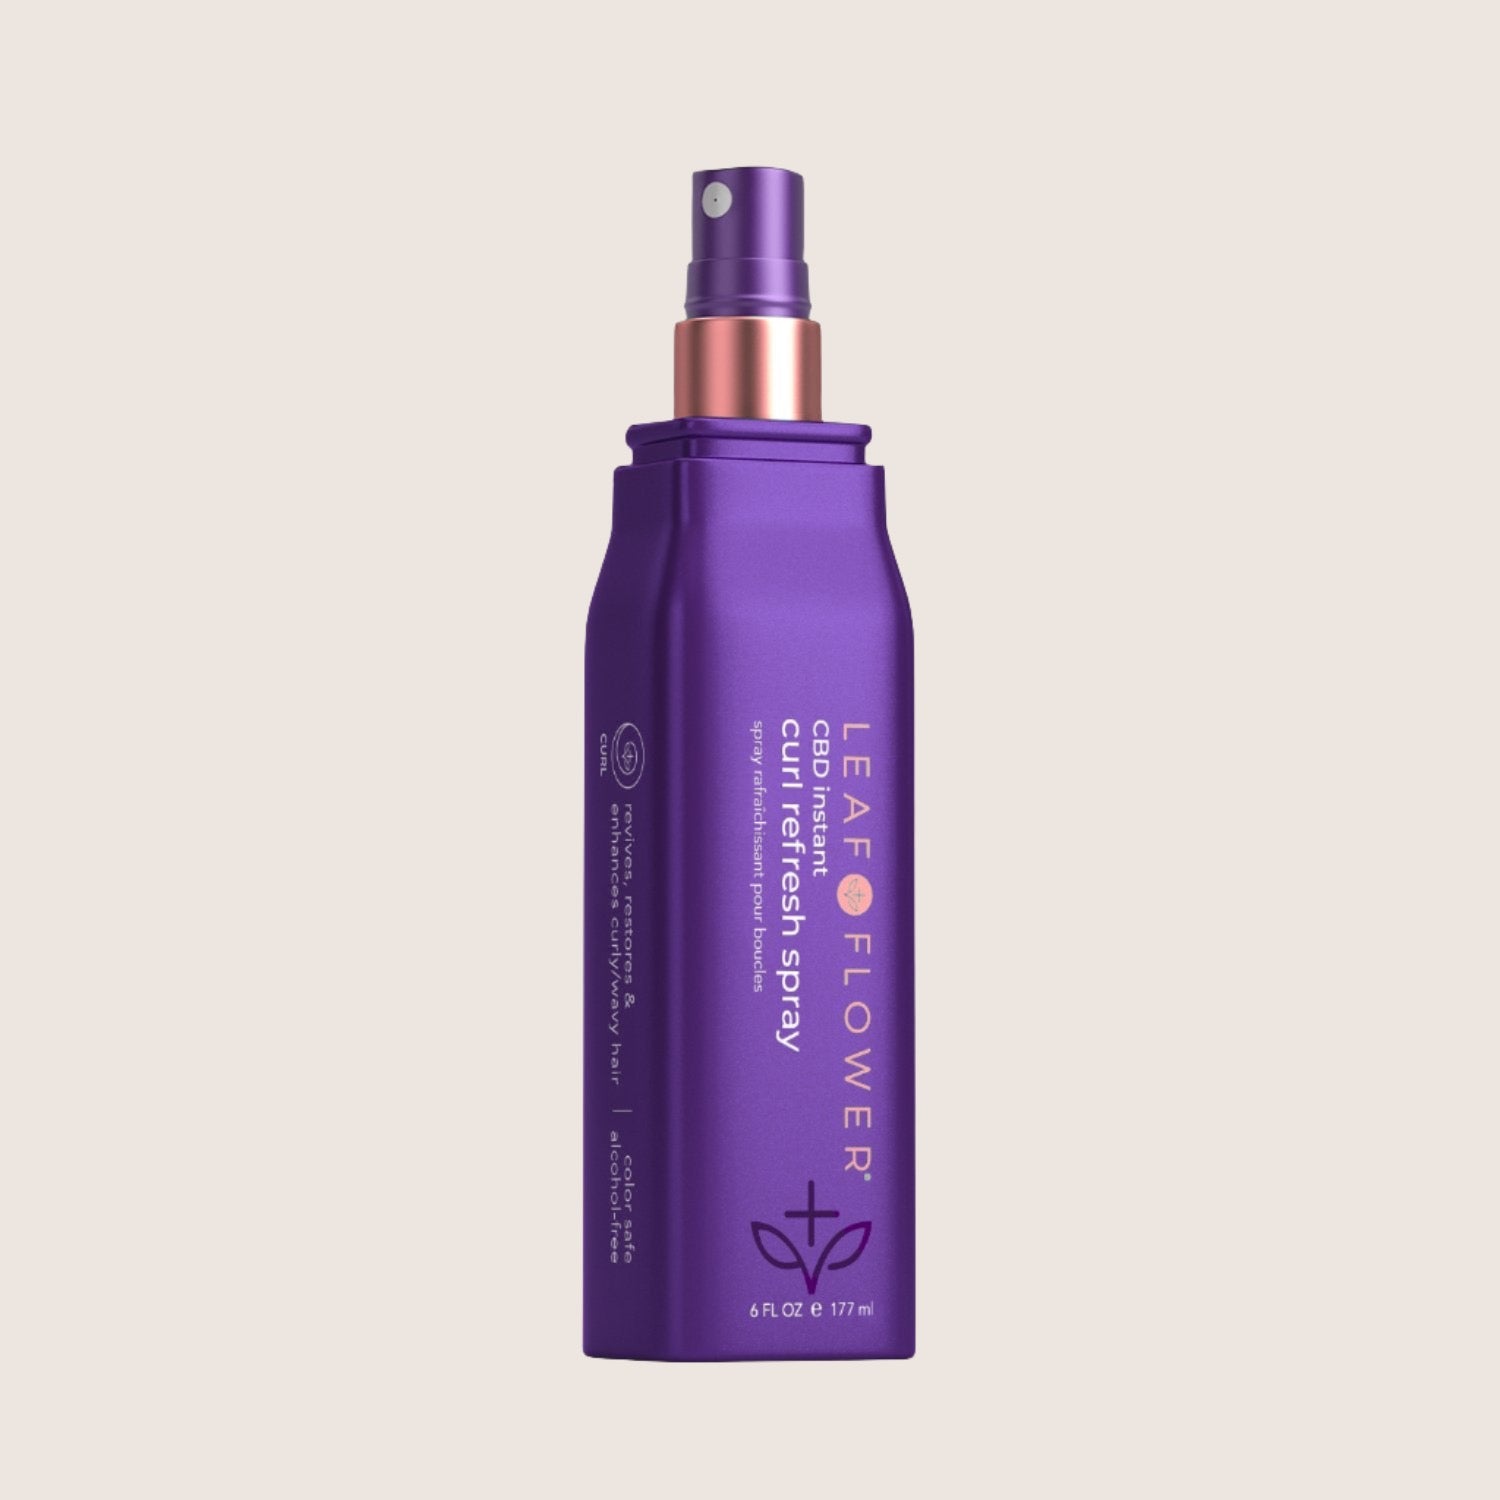 A purple bottle of Leaf and Flower CBD Instant Curl Refresh Spray, a vegan curl activator with a nozzle, holding 6 fl oz (177 ml).